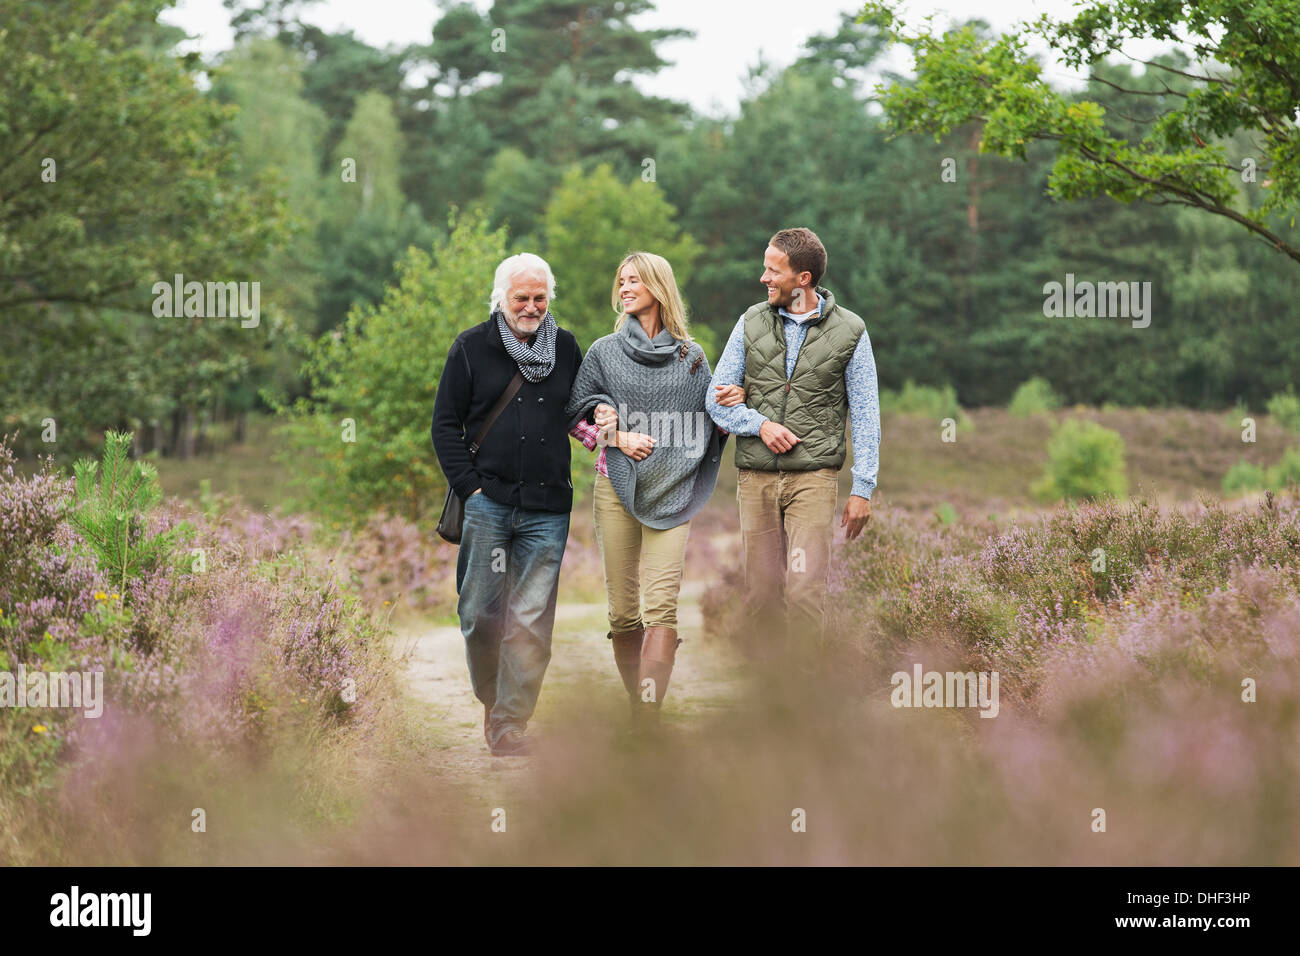 Senior man, mid adult man and woman walking through forest Stock Photo